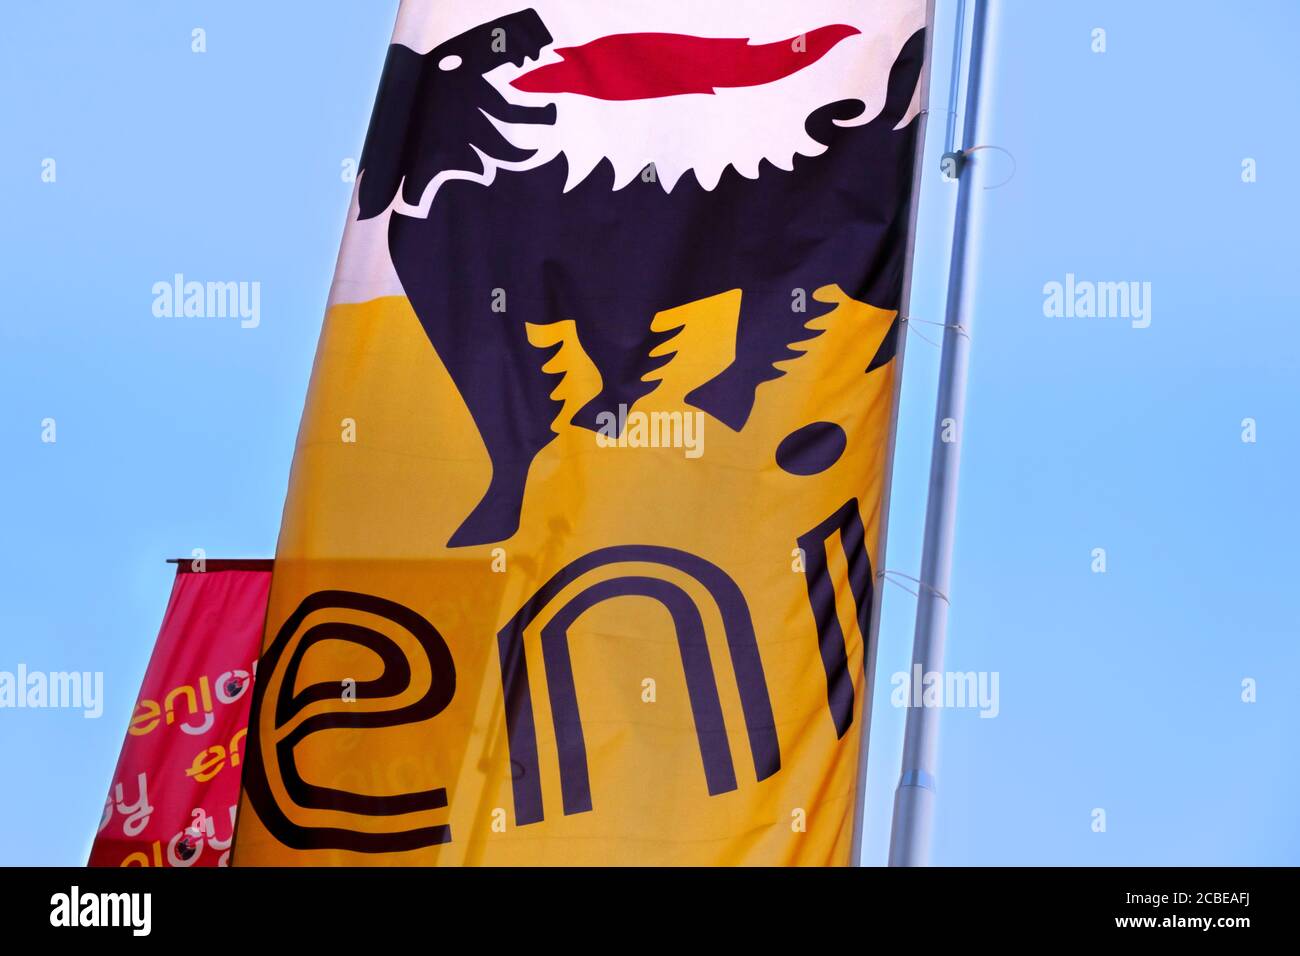 The logo of the italian oil and gas company ENI (Ente Nazionale Idrocarburi) waving on a flag.Eni is considered as one of the supermajor oil company. Stock Photo